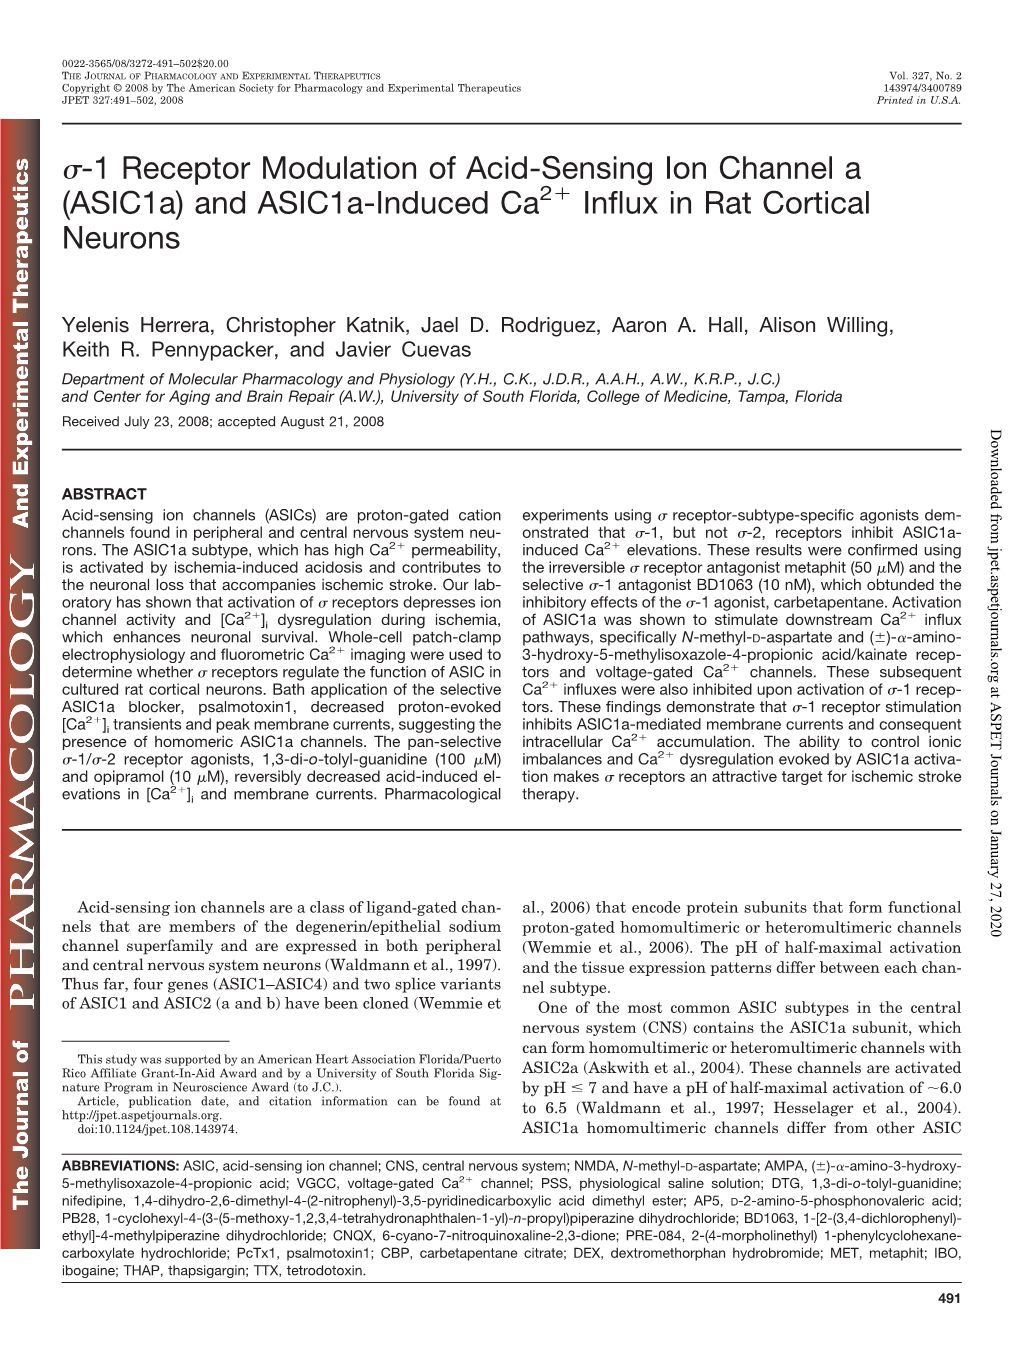 And Asic1a-Induced Ca Influx in Rat Cortical Neurons